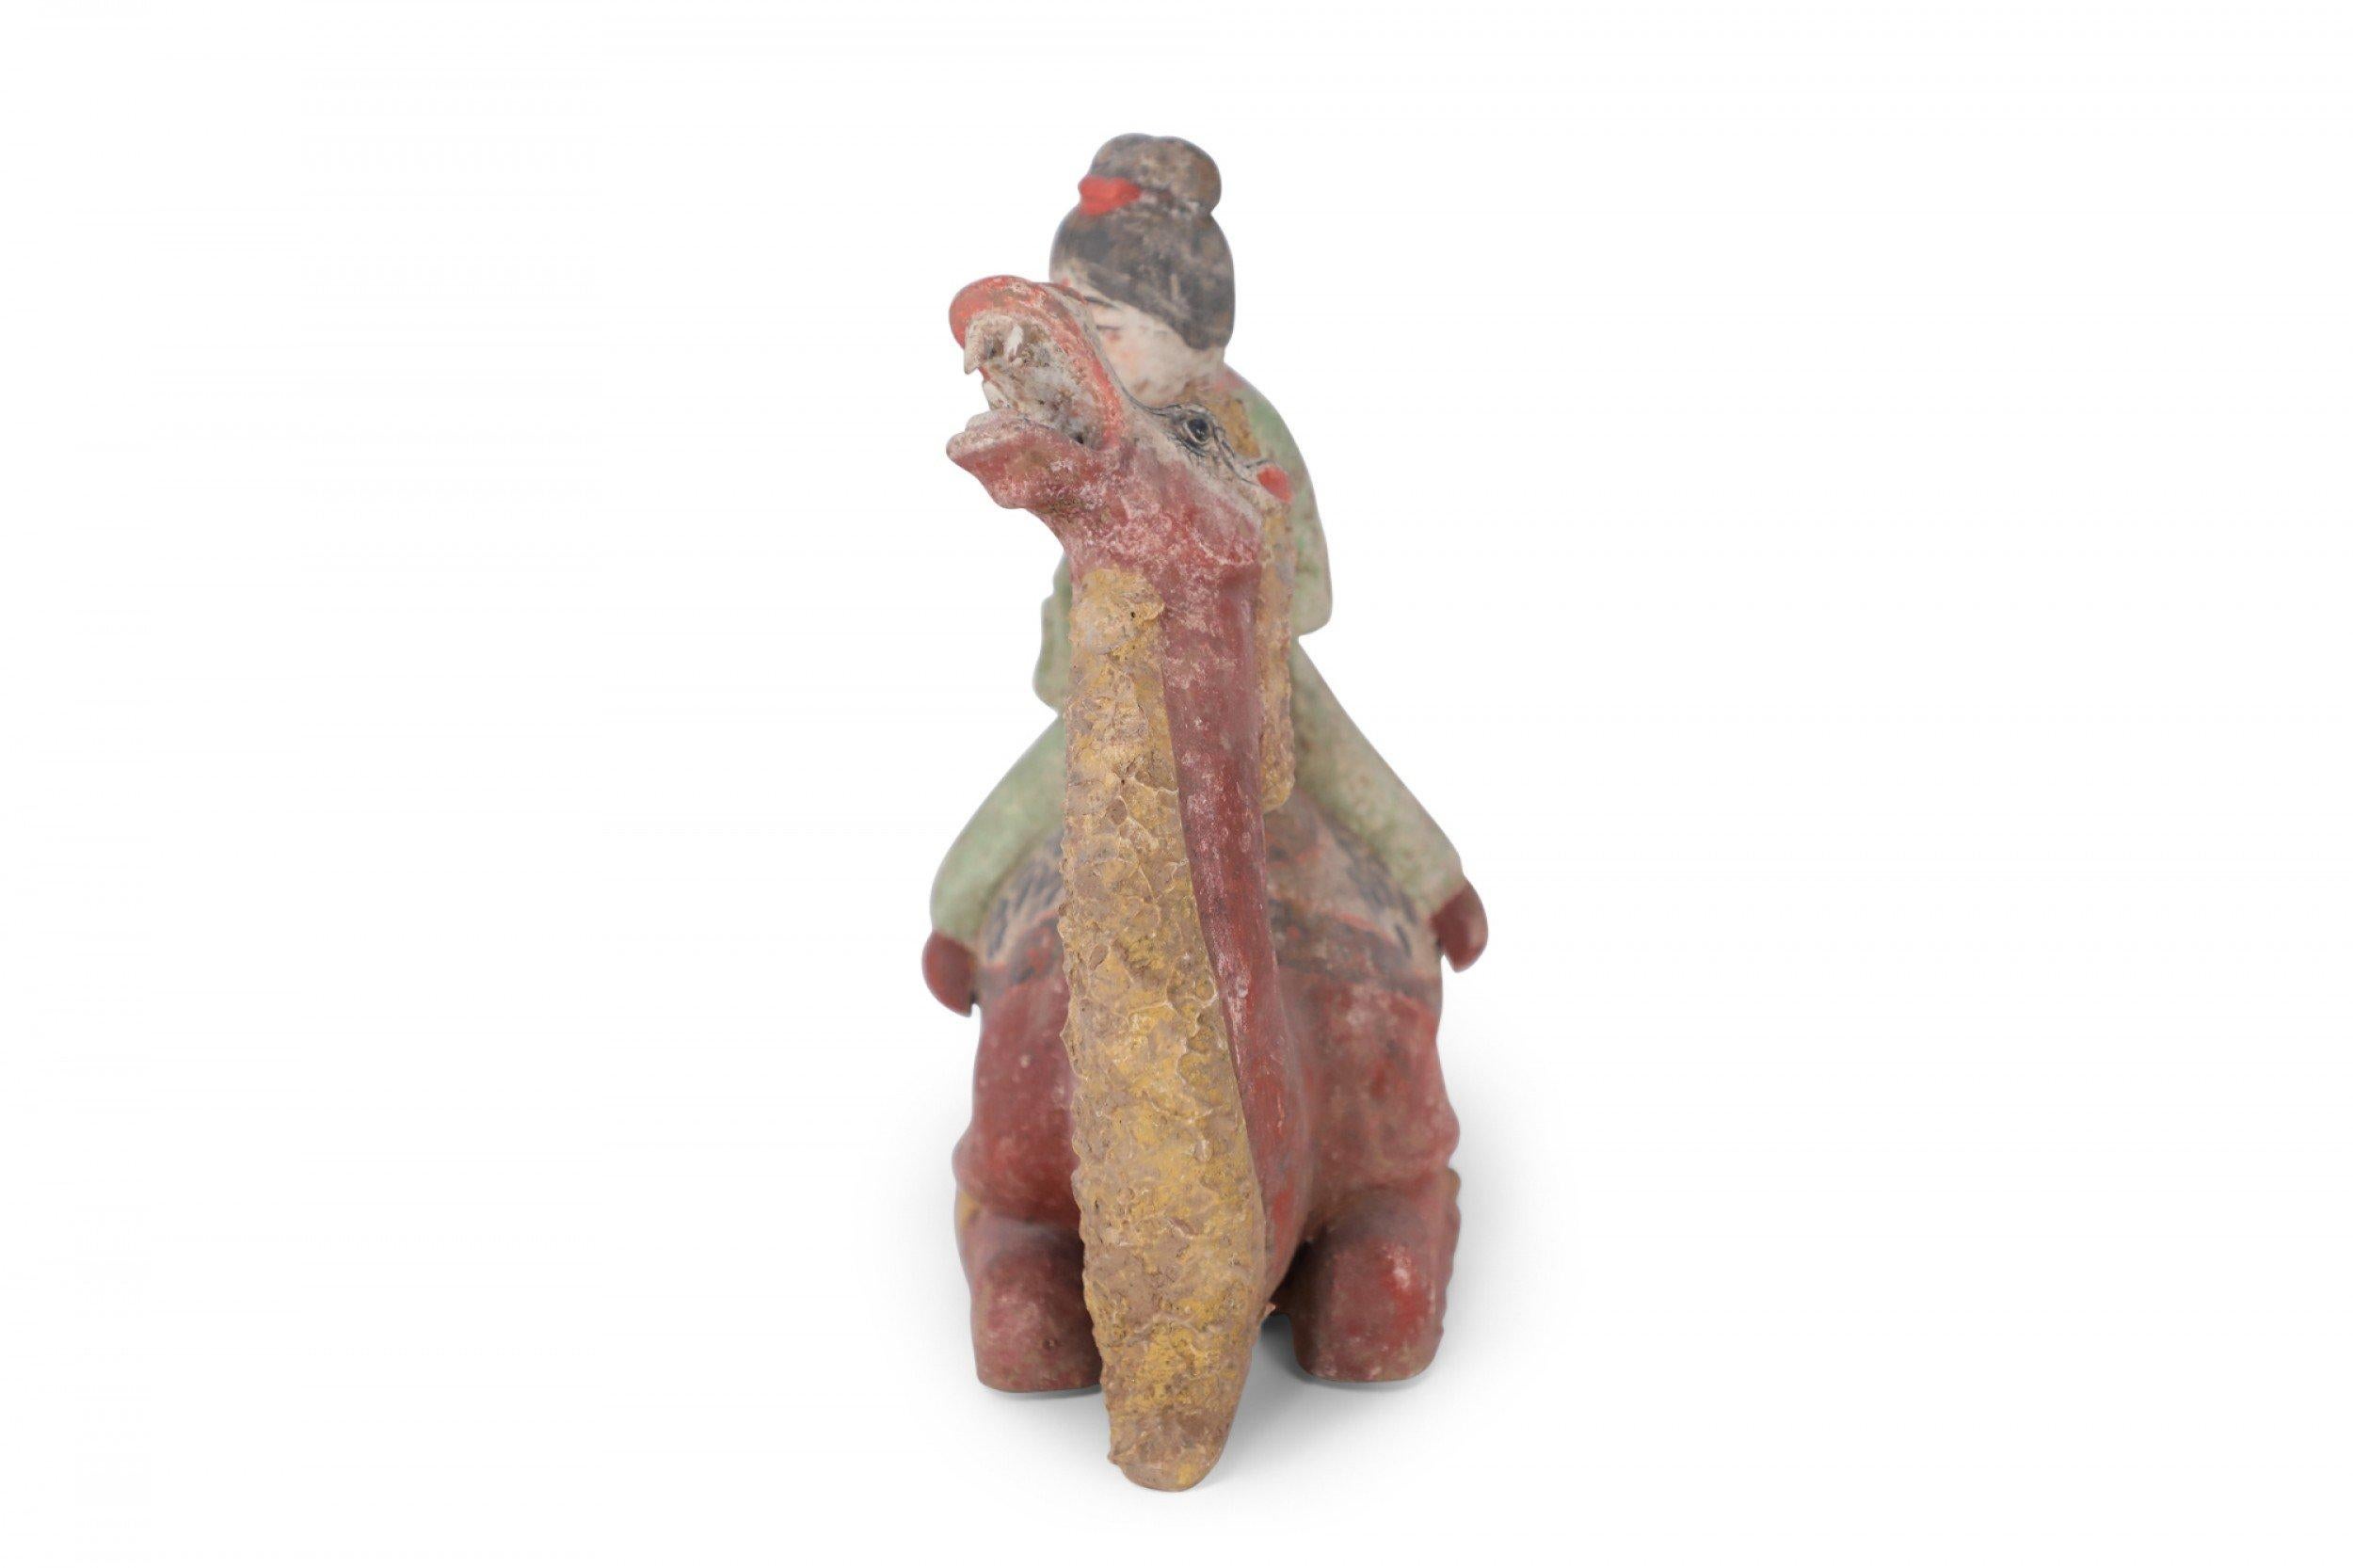 Antique Chinese Tang Dynasty-style terra cotta tomb figure of a woman in a green dress sitting on a kneeling yellow and red Bactrian camel with its head tilted back and mouth open to the sky.
 